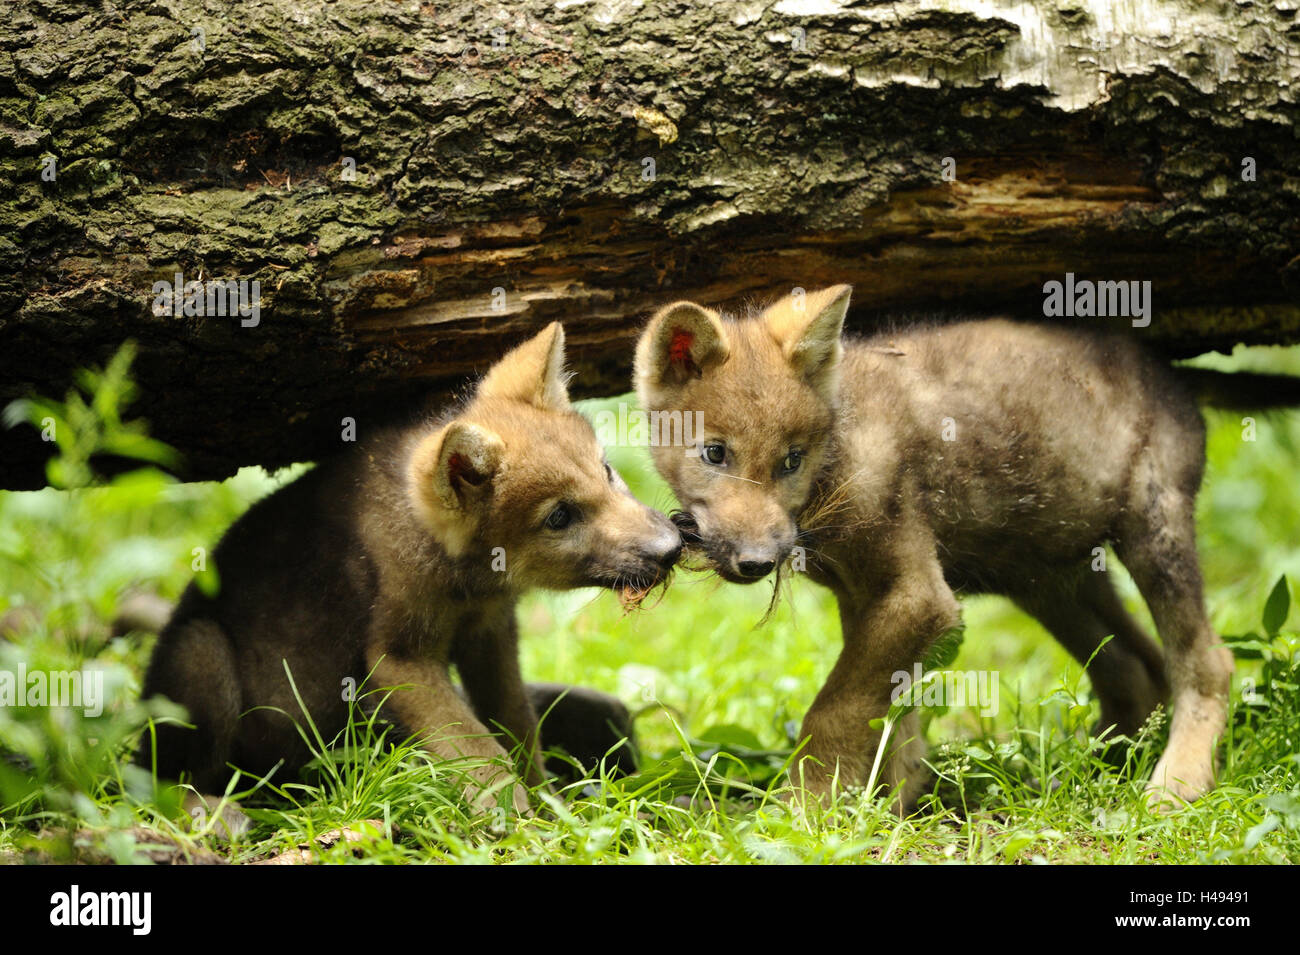 Wolves, Canis lupus, puppies, looking at camera, Stock Photo